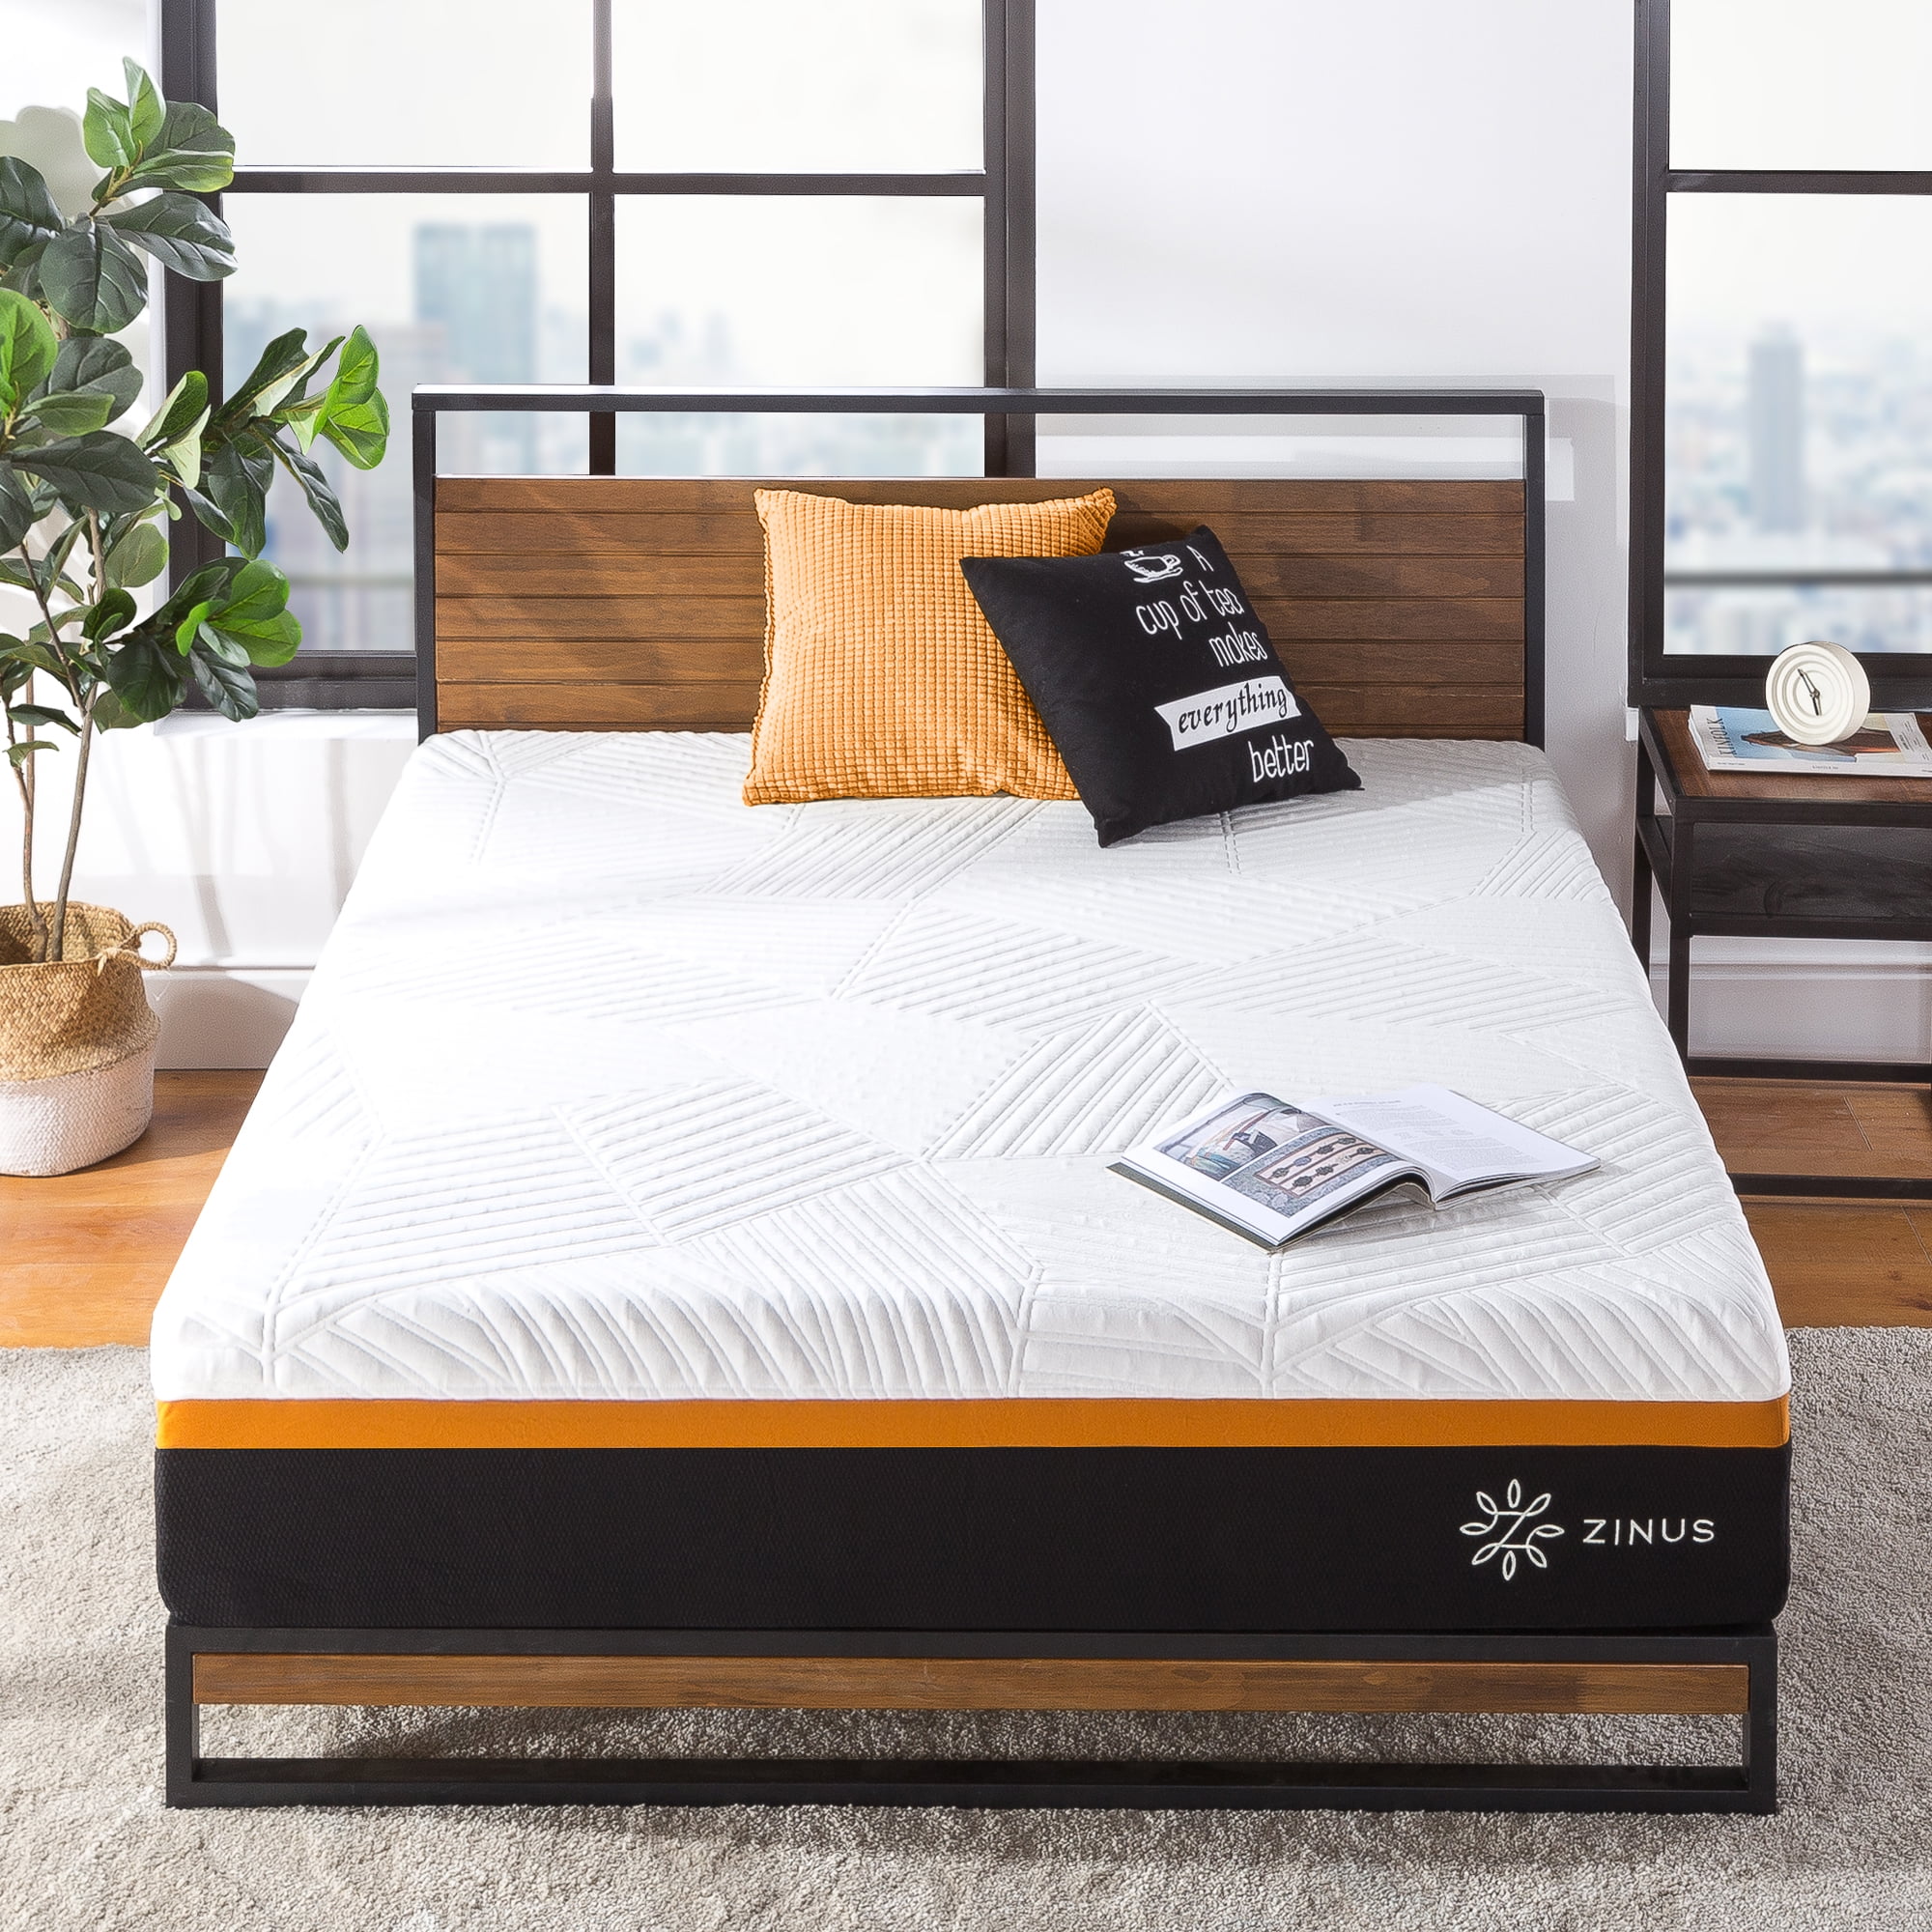 Photo 1 of Zinus 12 Cooling Copper Adaptive Hybrid Mattress with Innersprings for Motion Isolation, Full